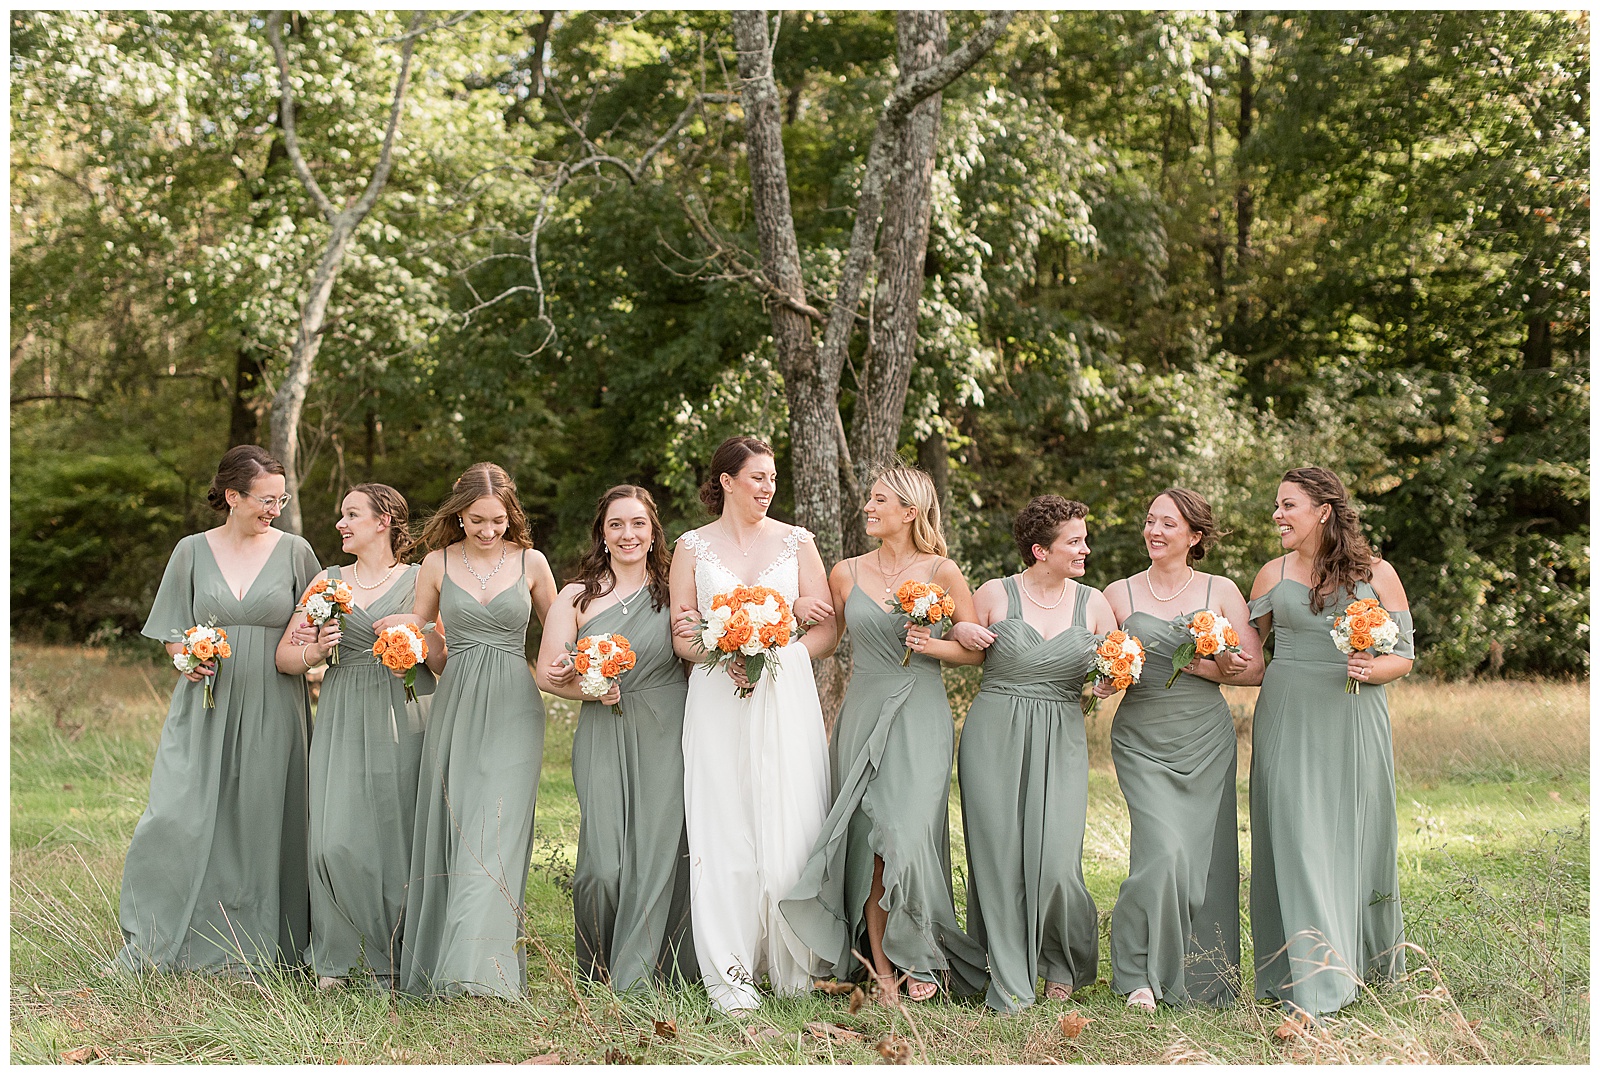 bride and bridesmaids all holding orange and white bouquets walking towards camera in collegeville pennsylvania